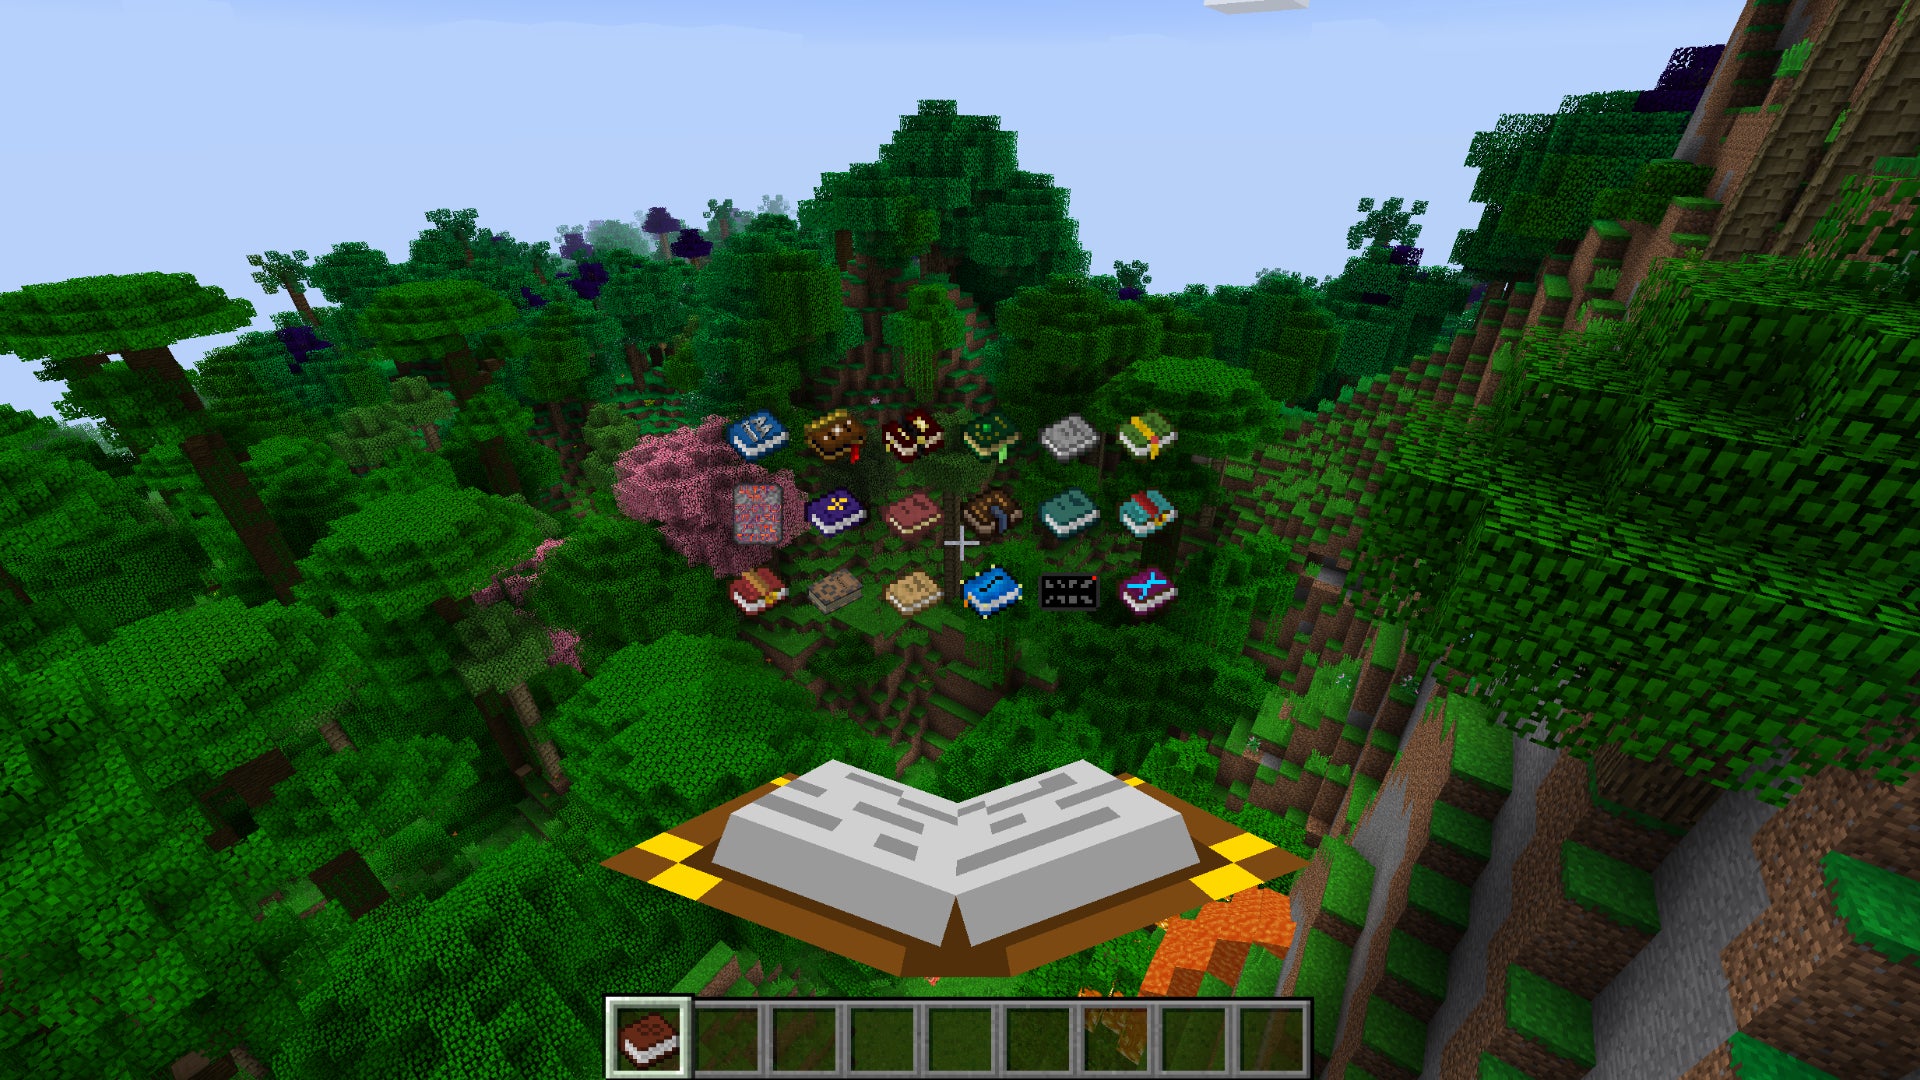 The player in Minecraft looks down upon a forest, and opens up a modded book in FTB Revelation, a popular modpack, to reveal a menu of book icons to choose from.